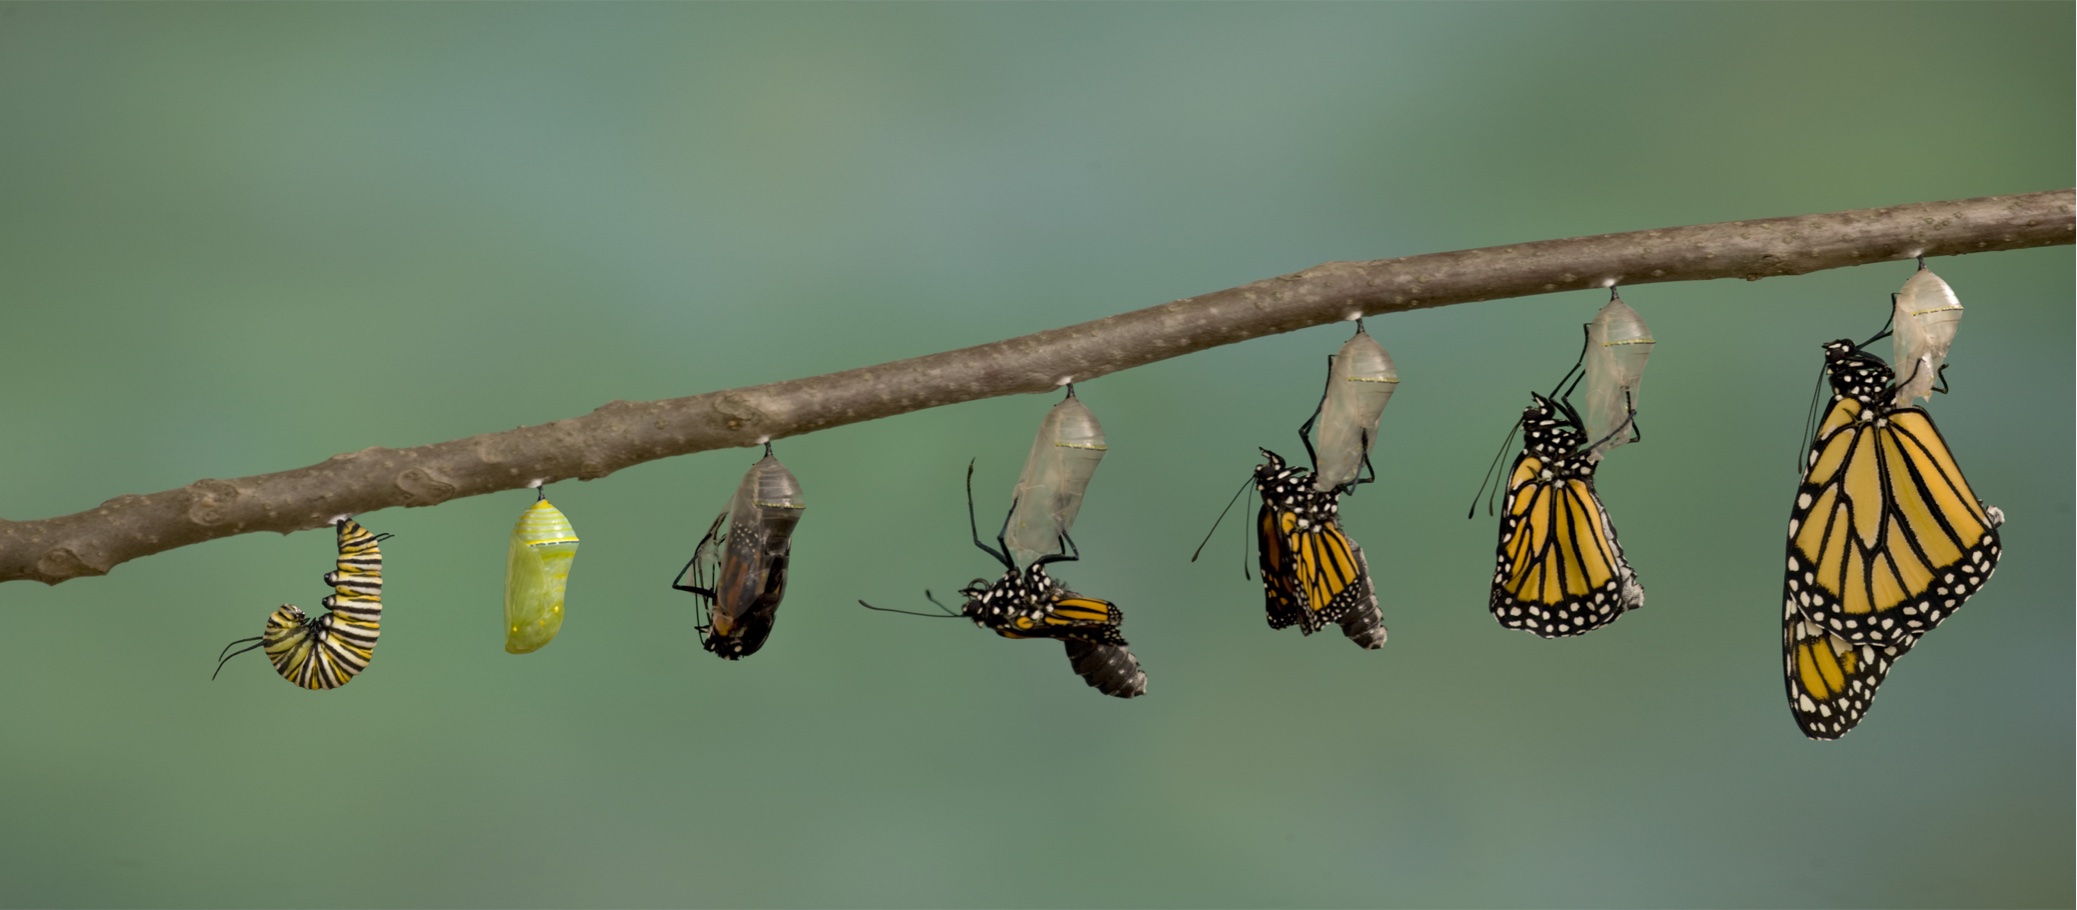 Stages of a caterpillar becoming a butterfly